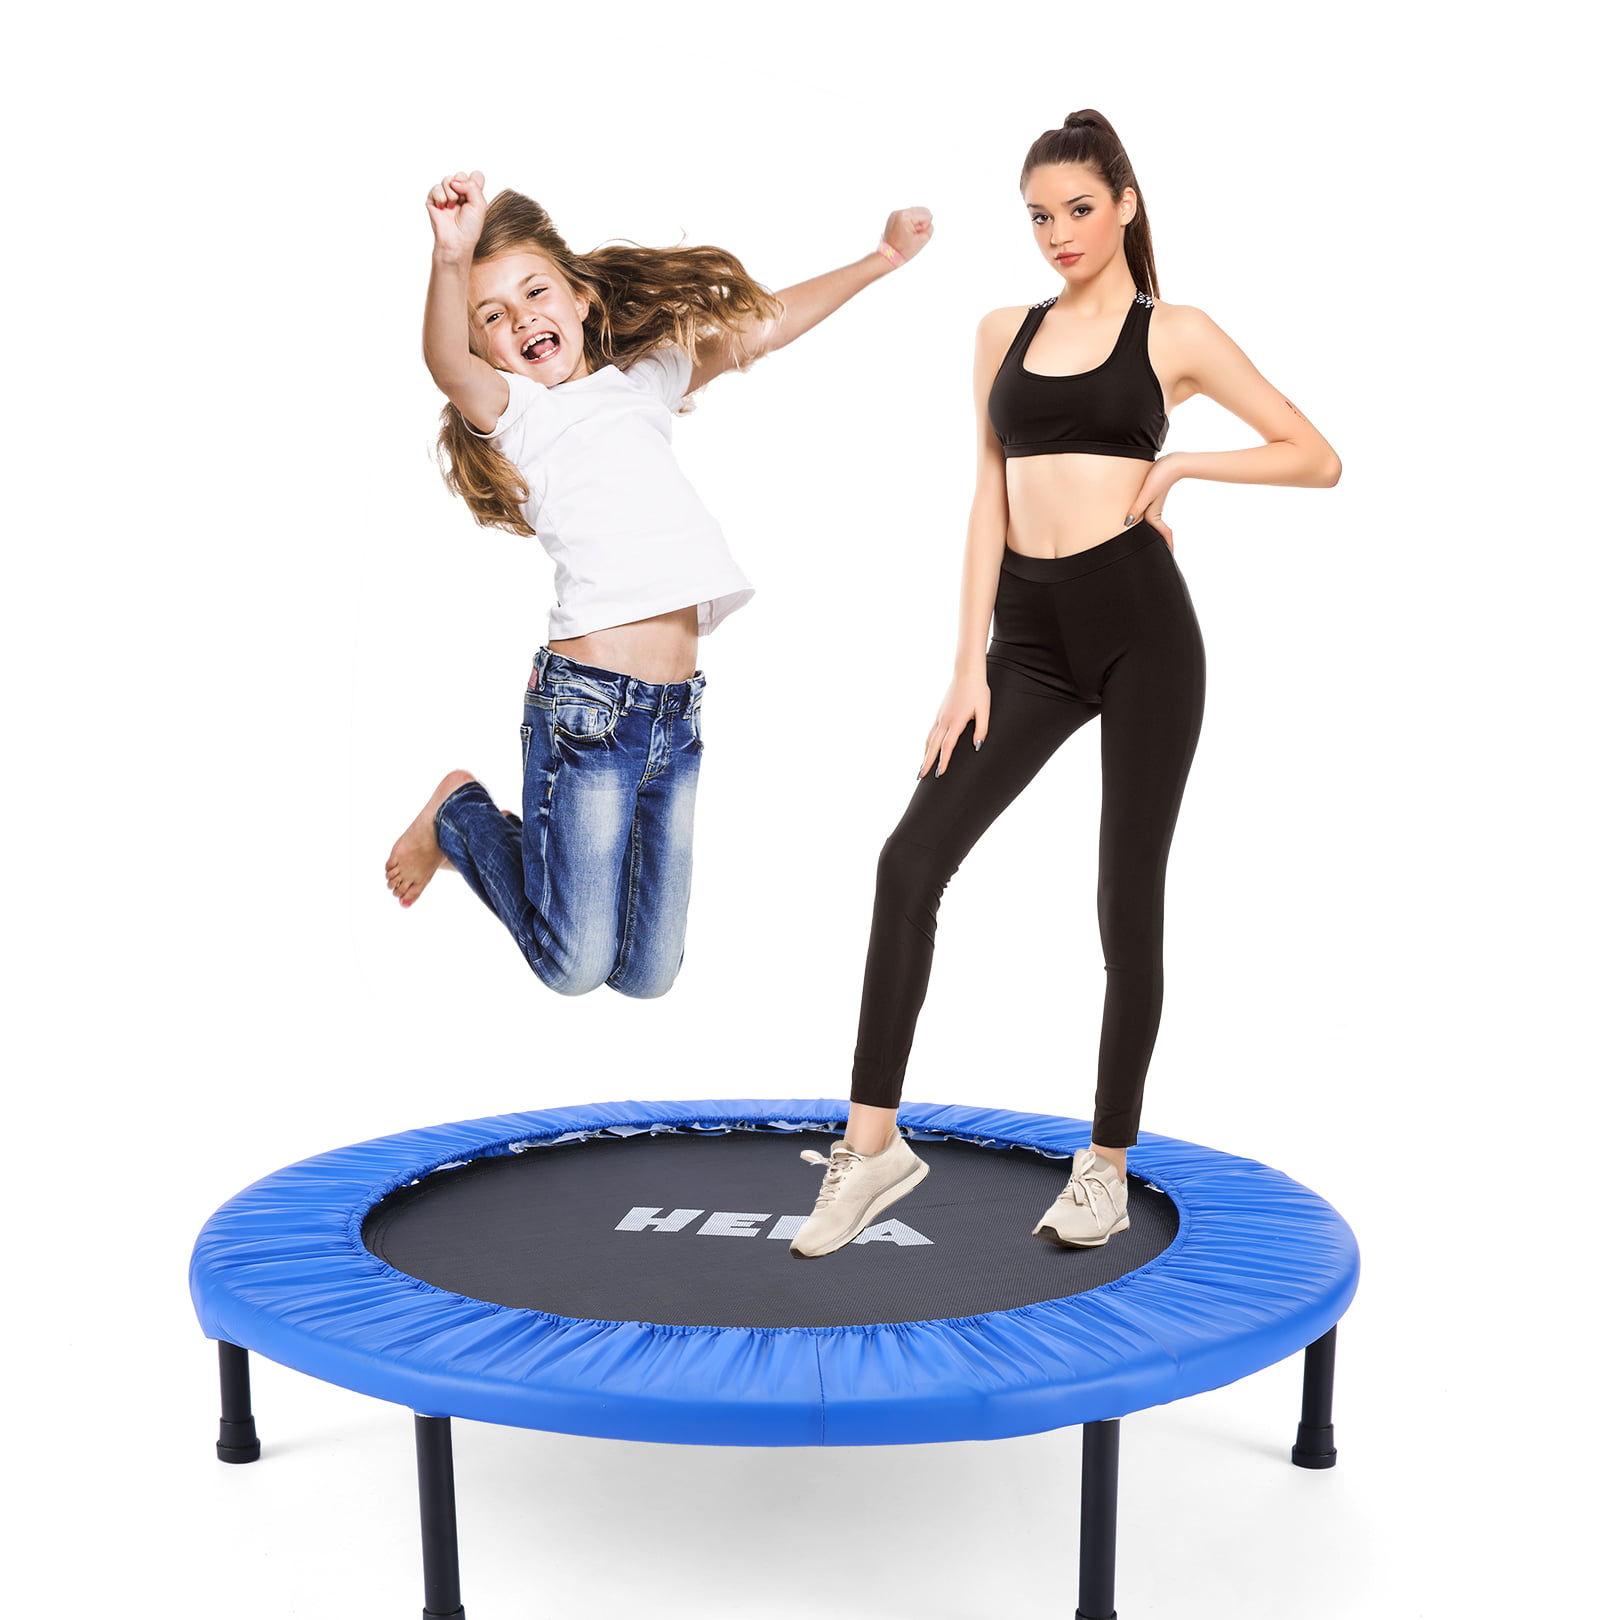 56" Trampoline With Handrail Bouncing Workout Exercise Fitness Mini Rebounder 